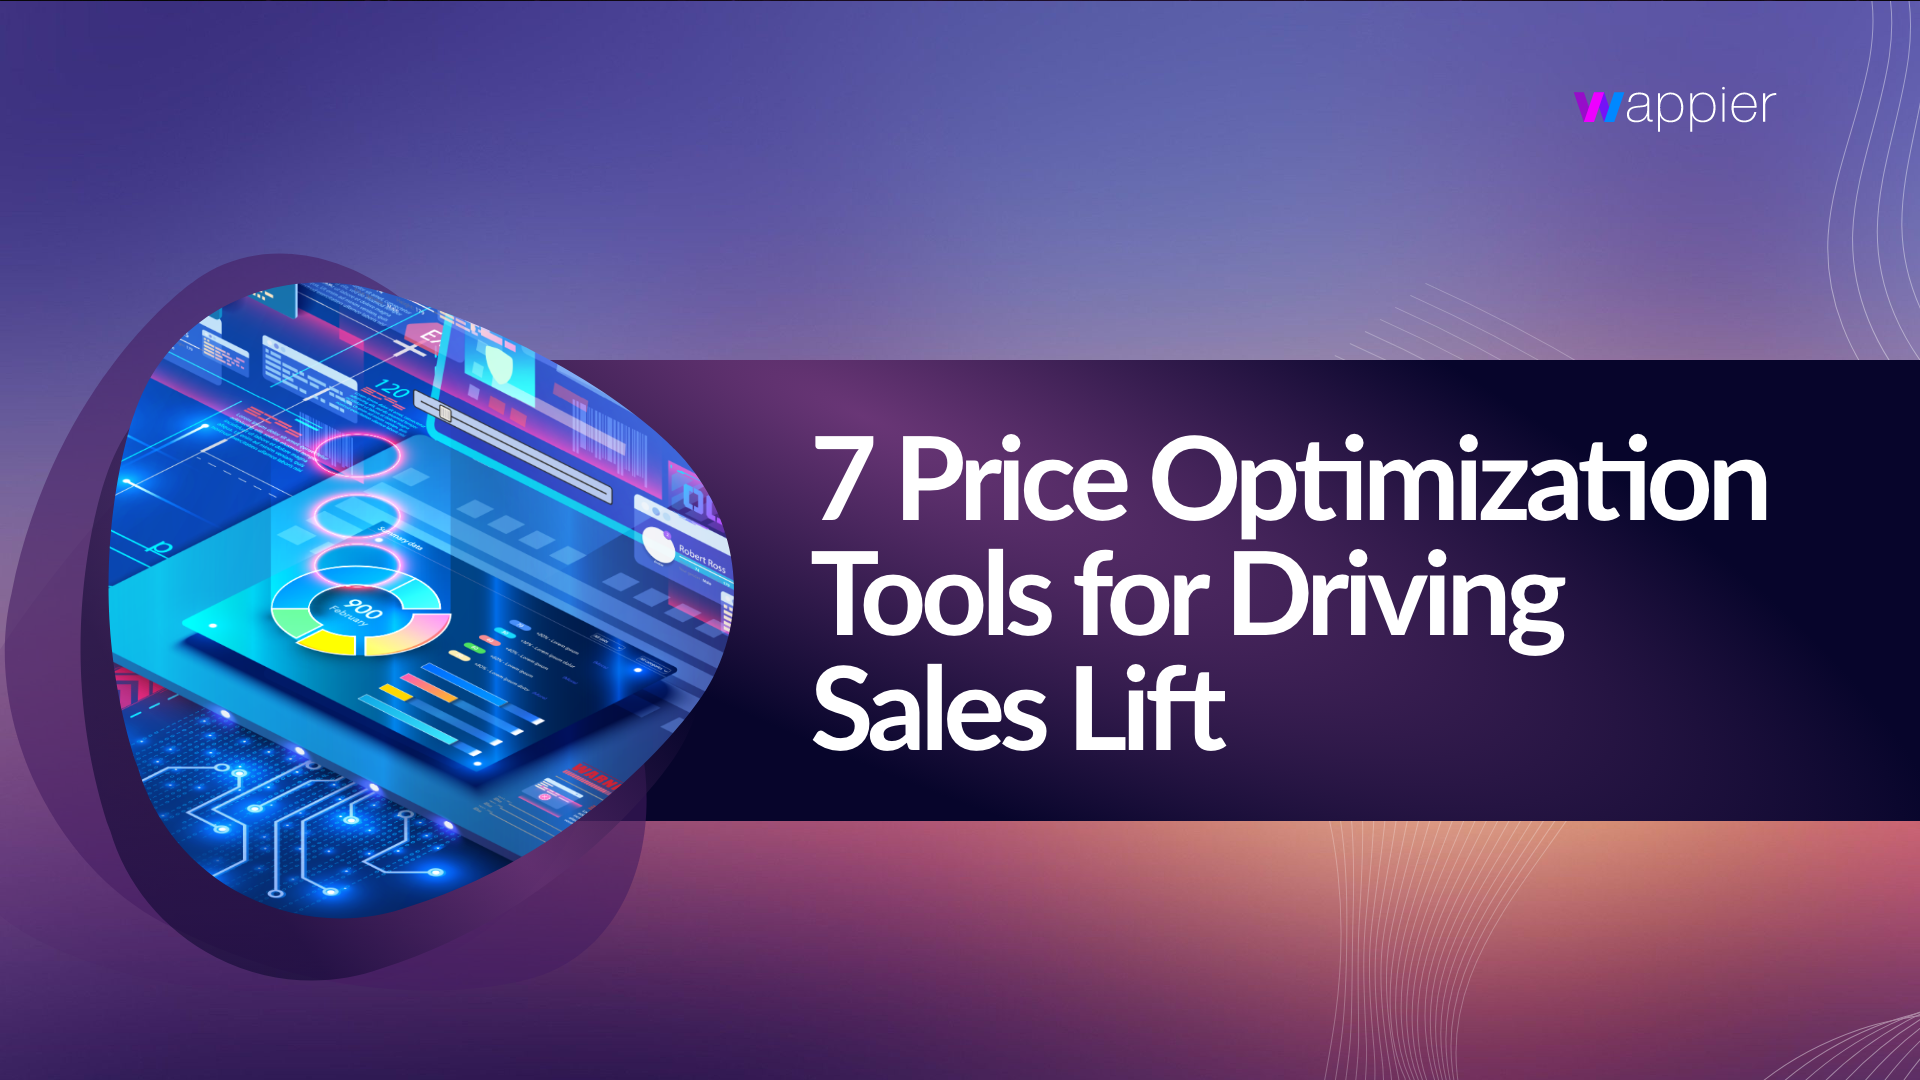 image for wappier article '7 Price Optimization Tools for Driving Sales Lift'